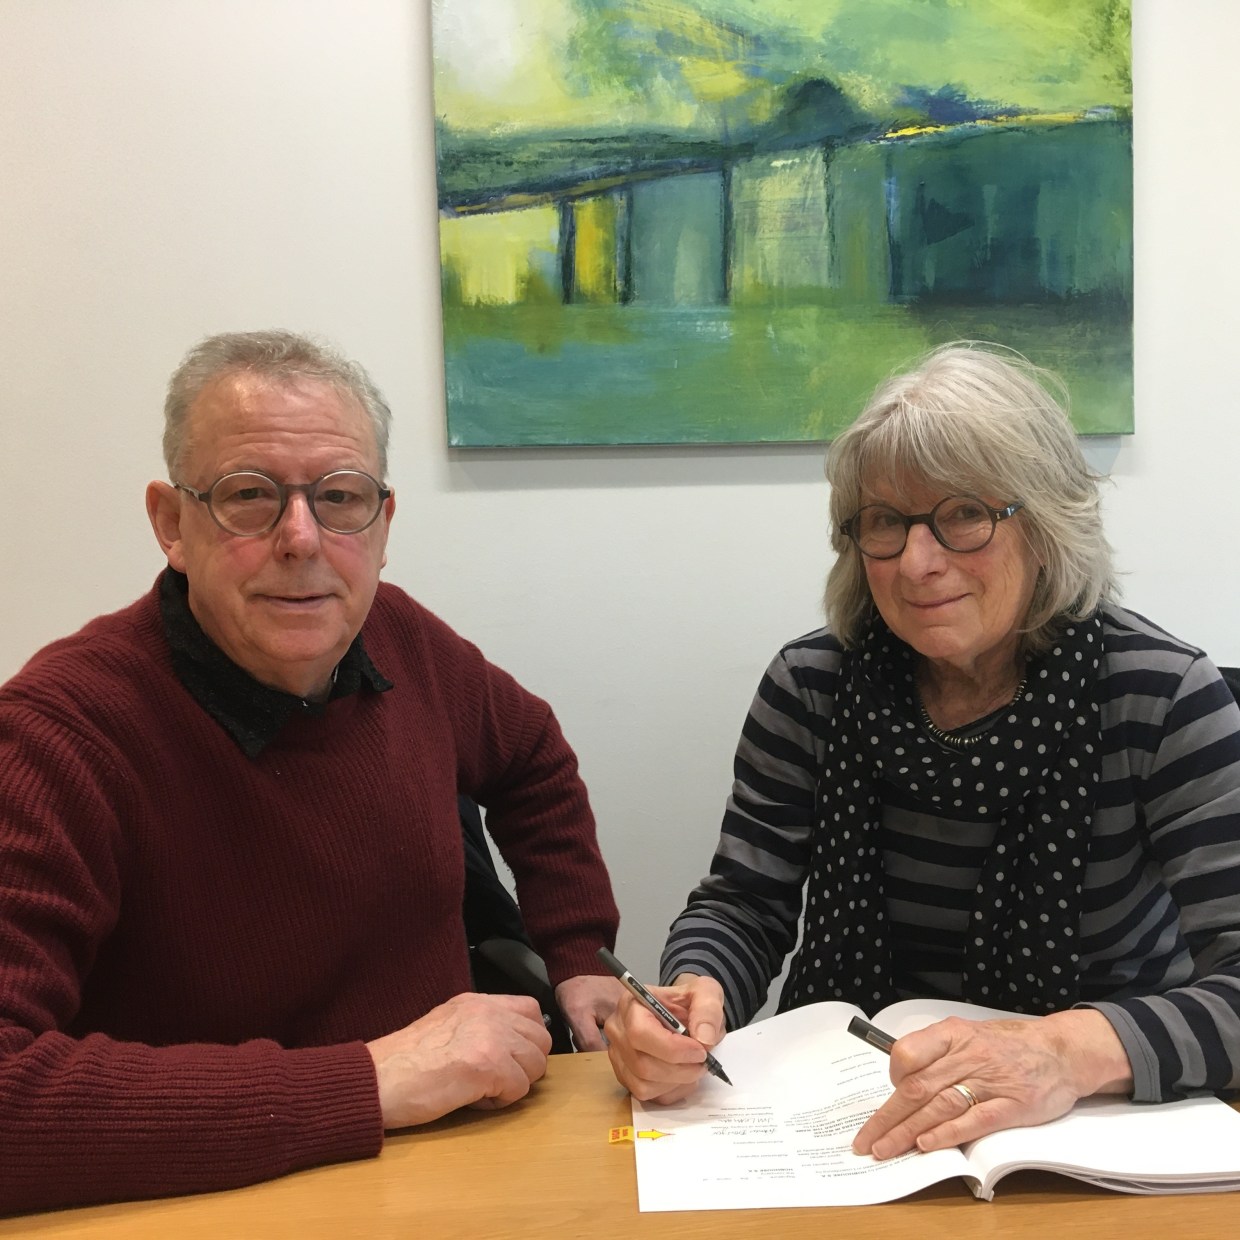 2020 On 13th February Jill Leman PRWS and Francis Bowyer PPRWS signed a 250 year lease on the gallery spaces...